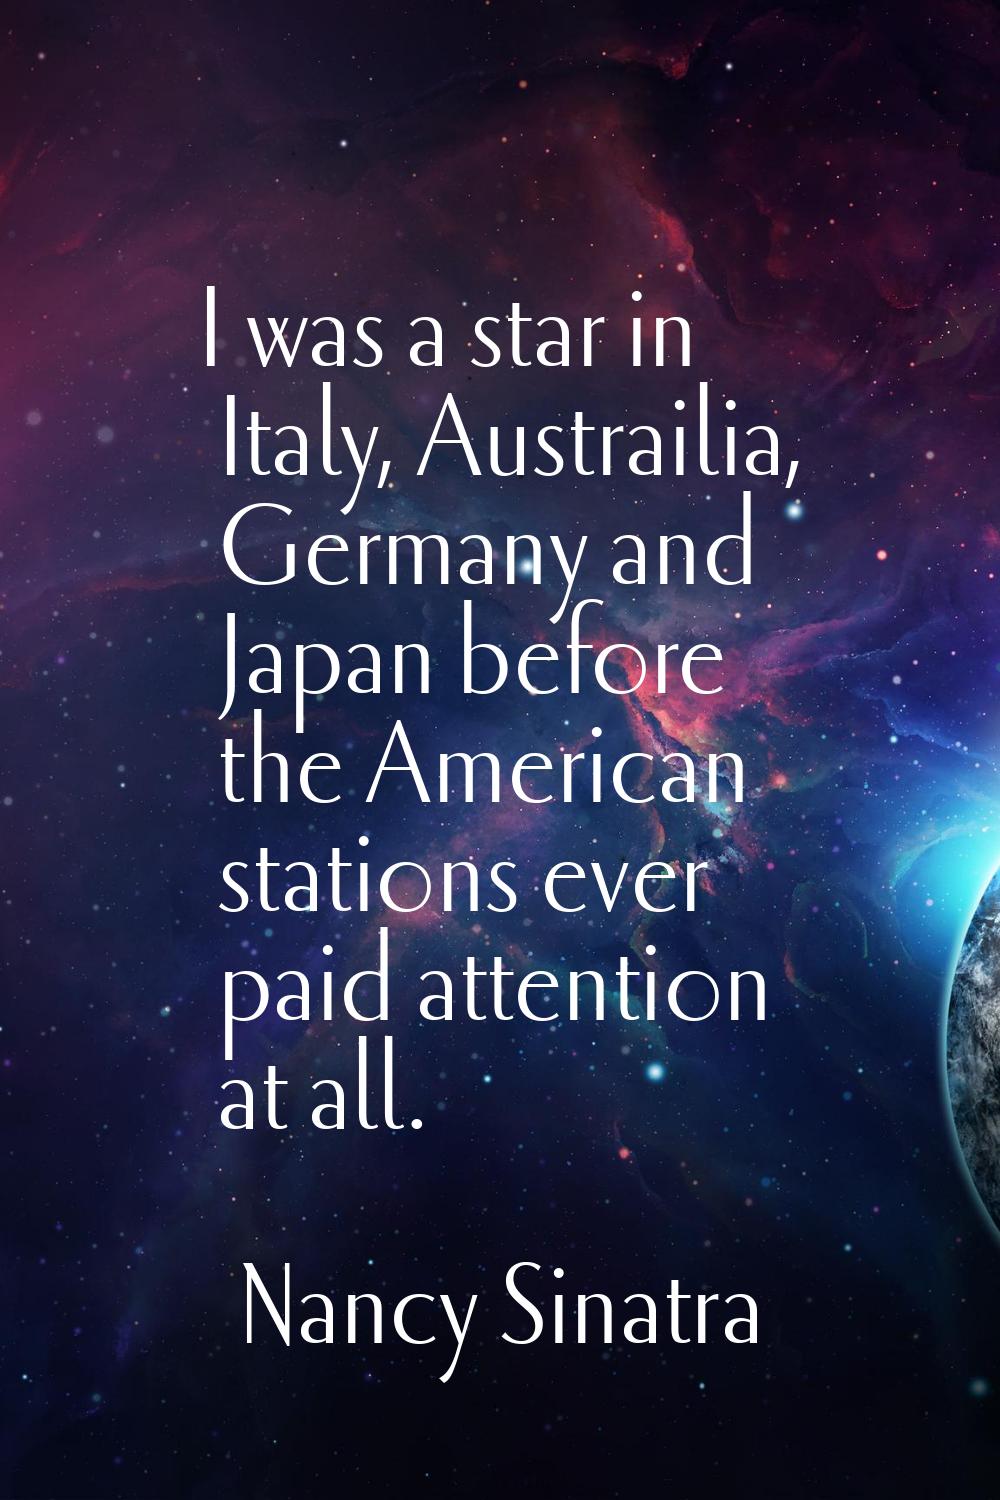 I was a star in Italy, Austrailia, Germany and Japan before the American stations ever paid attenti